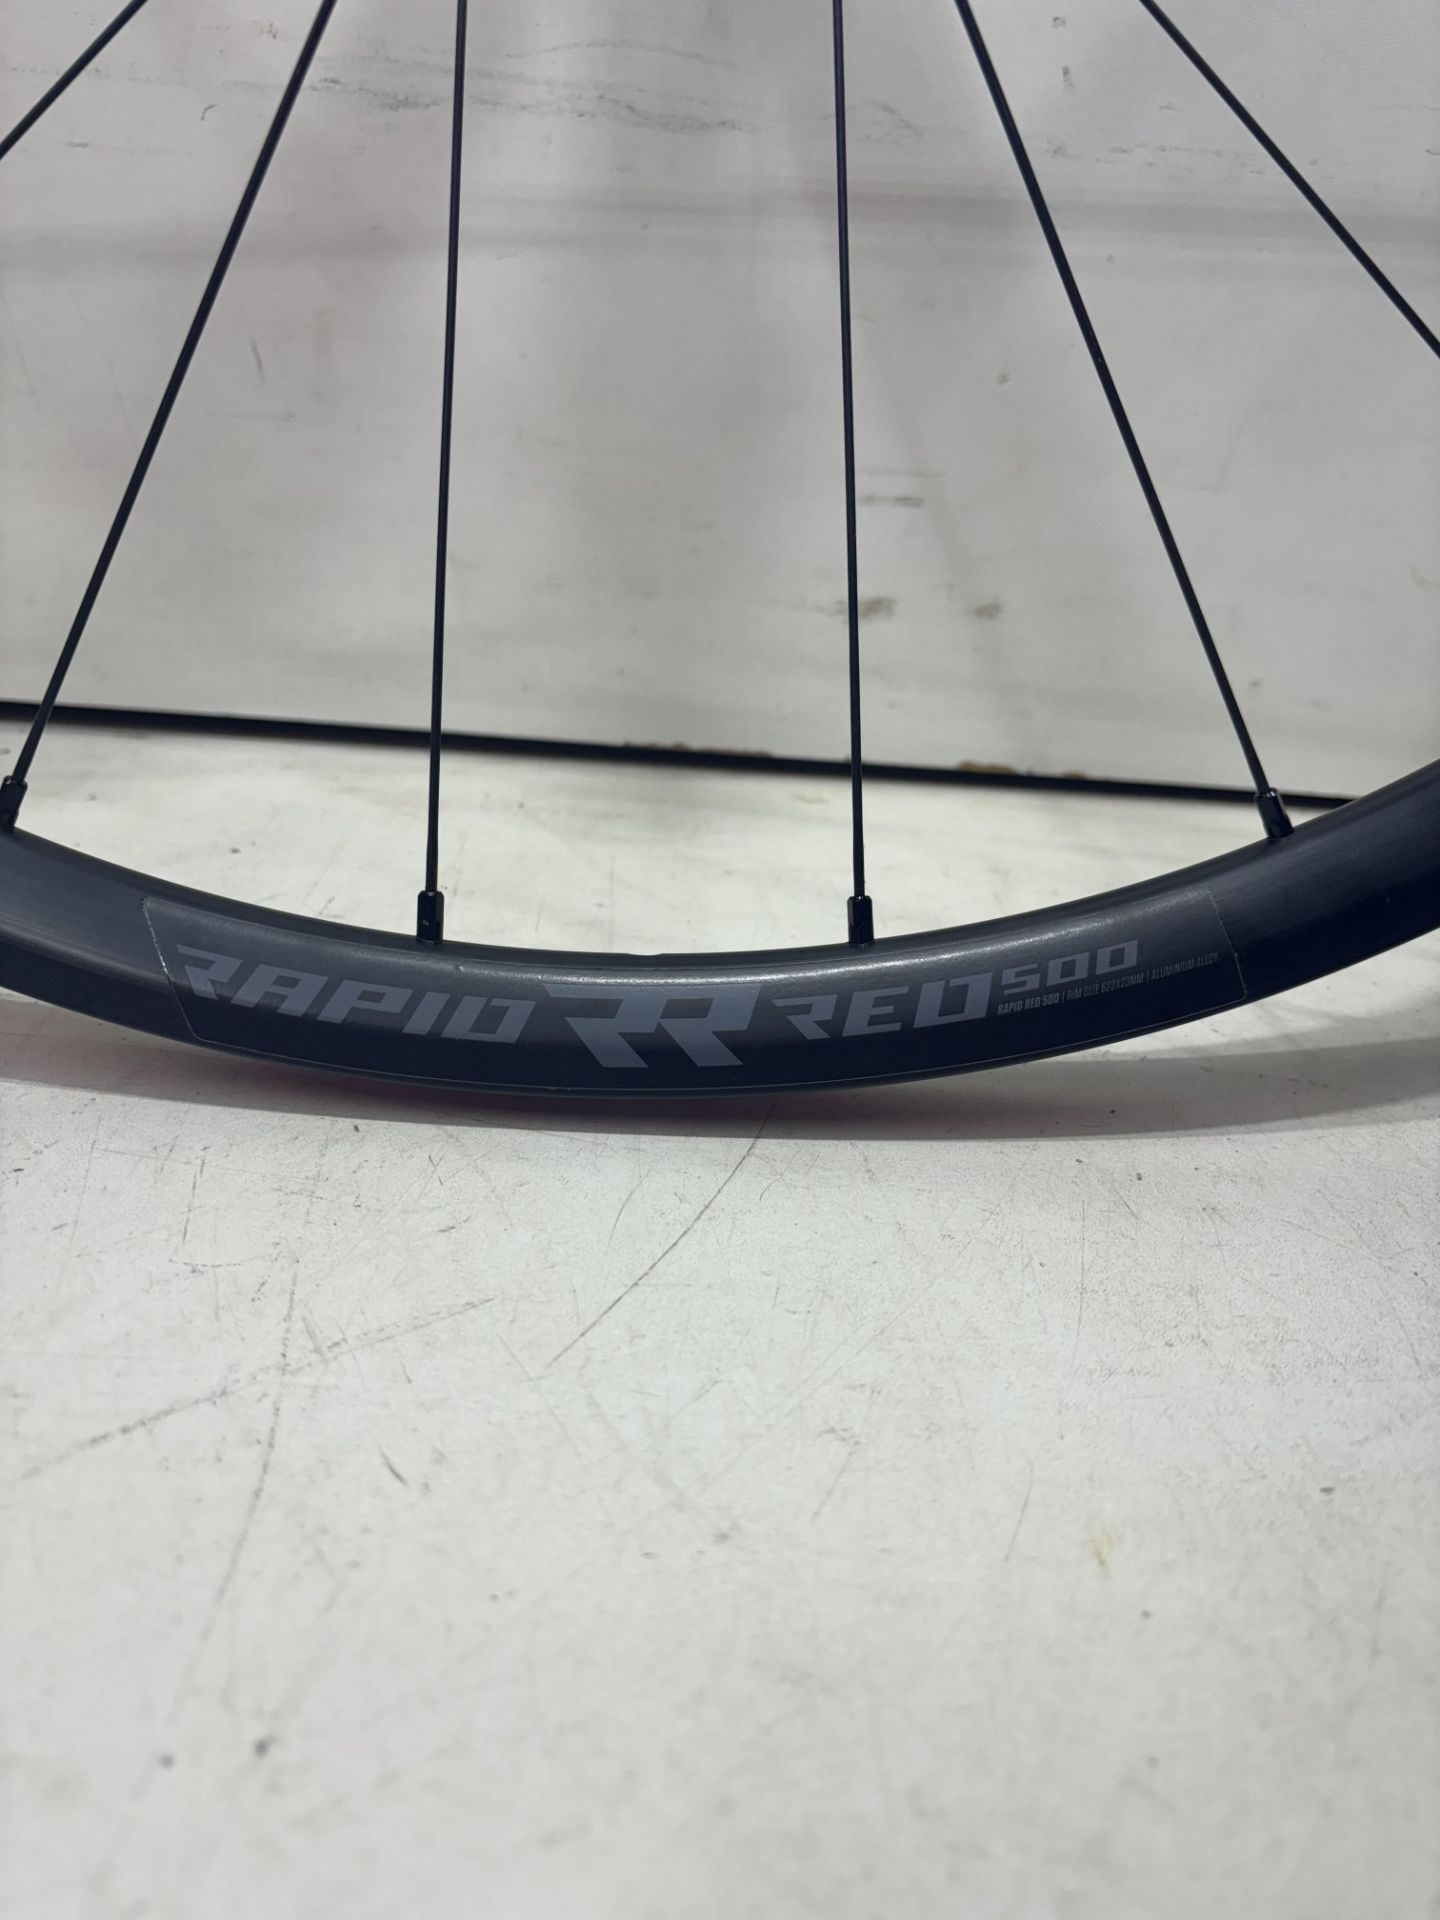 Fulcrum Rapid Red 500 Wheelset - Image 6 of 16